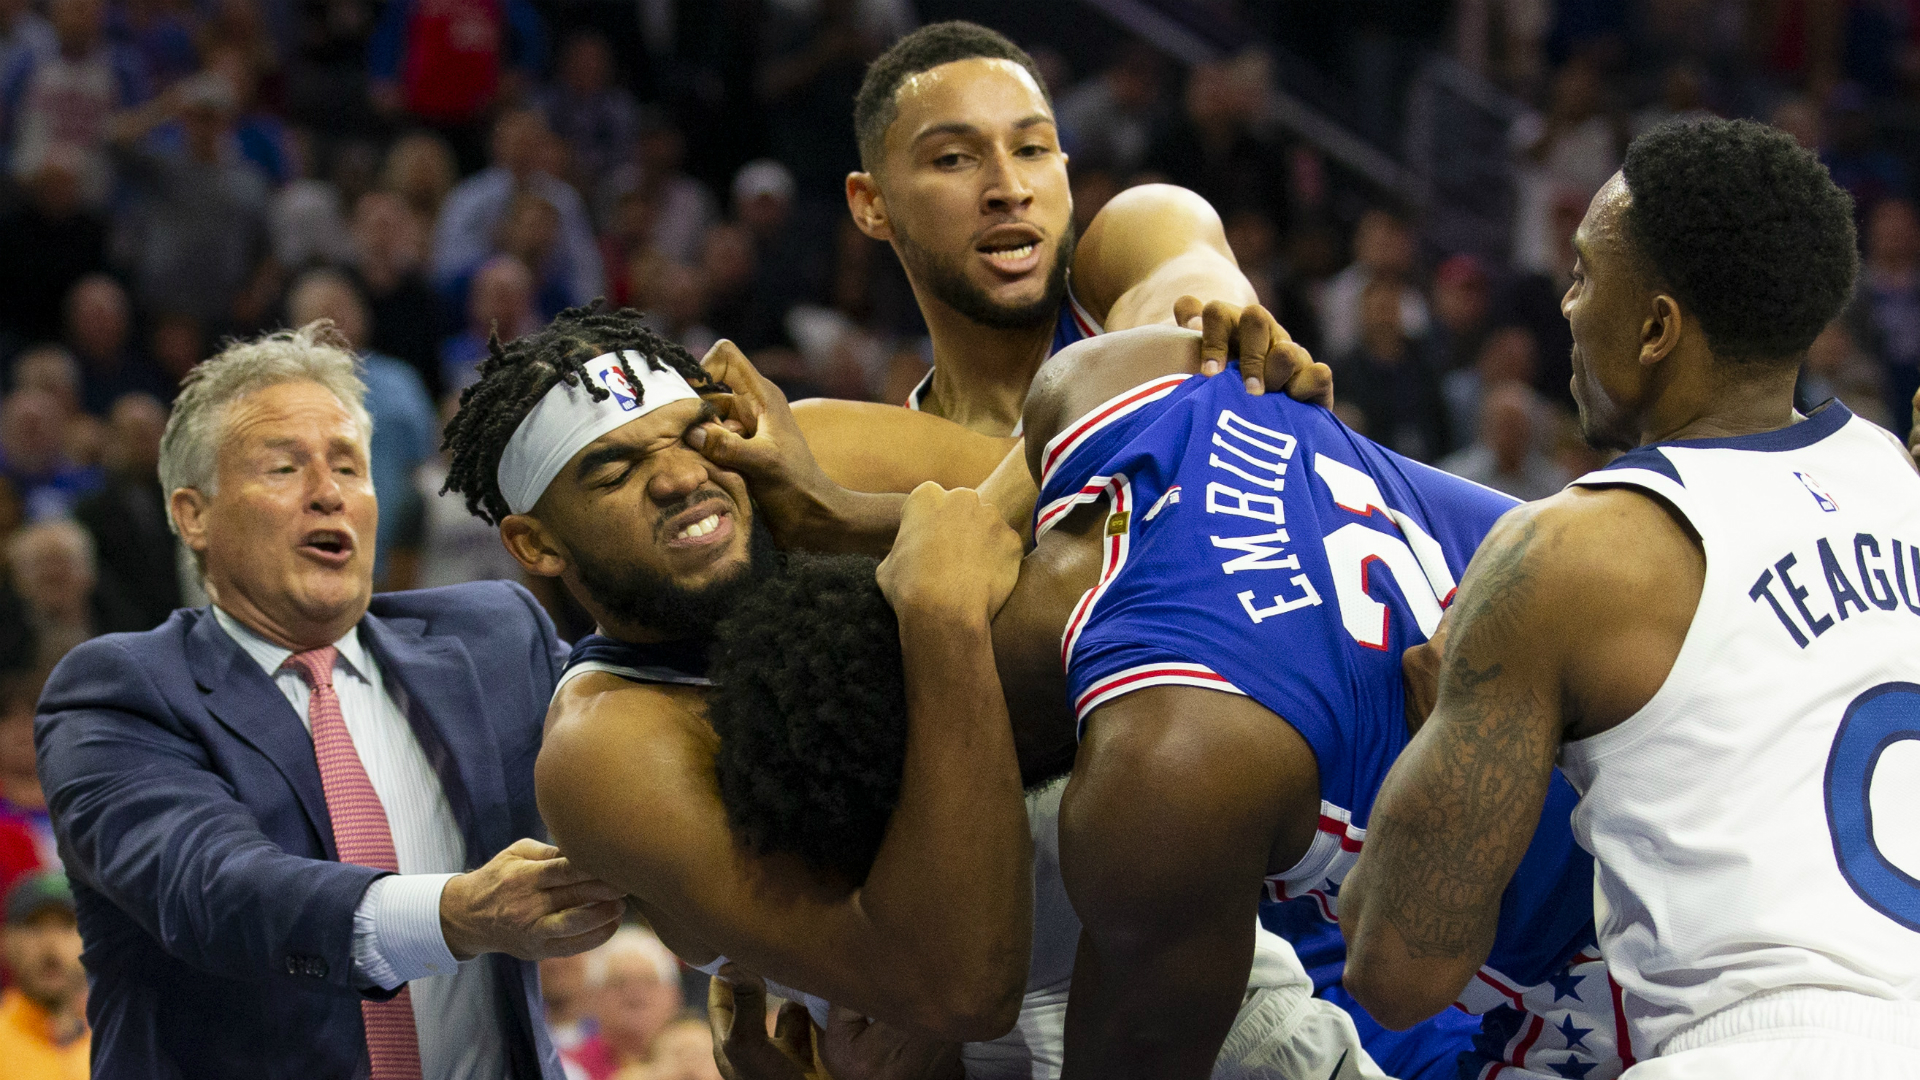 Flipboard: Ben Simmons rejects allegations he was aggressor in Embiid-Towns fight1920 x 1080